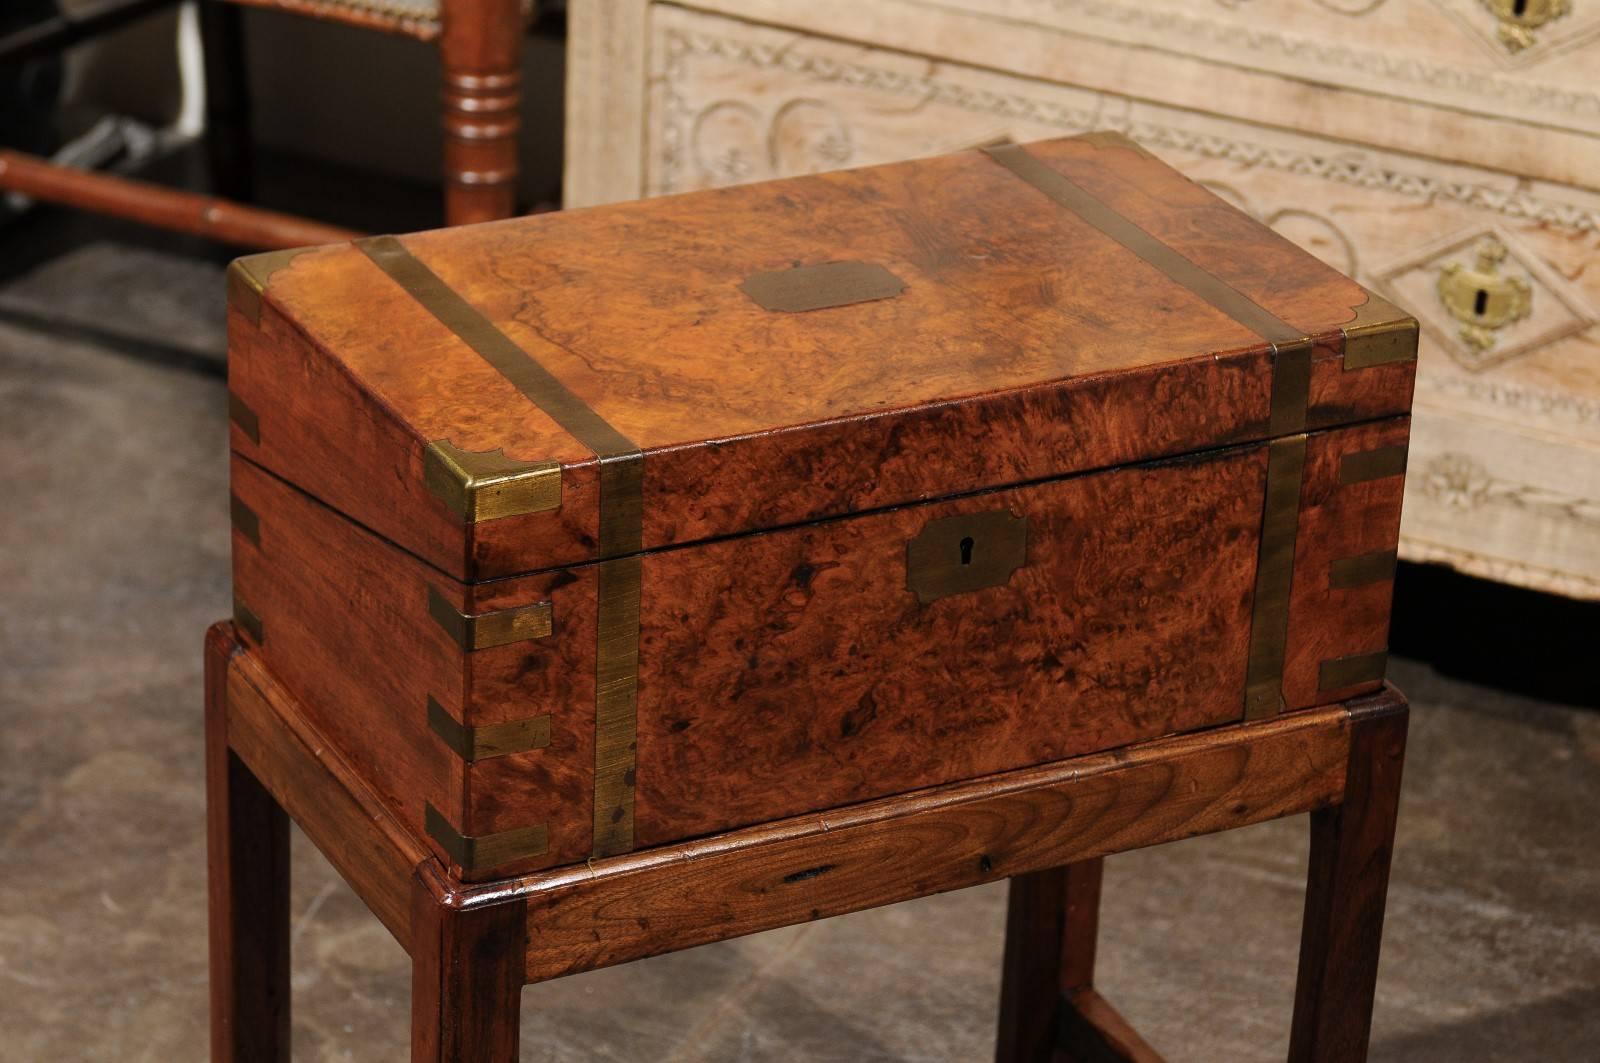 An English burled walnut lap desk from the second half of the 19th century with custom-made stand. This English box on stand features a rectangular top over a custom-made walnut stand with cross stretcher. The brass bound box opens to reveal a black